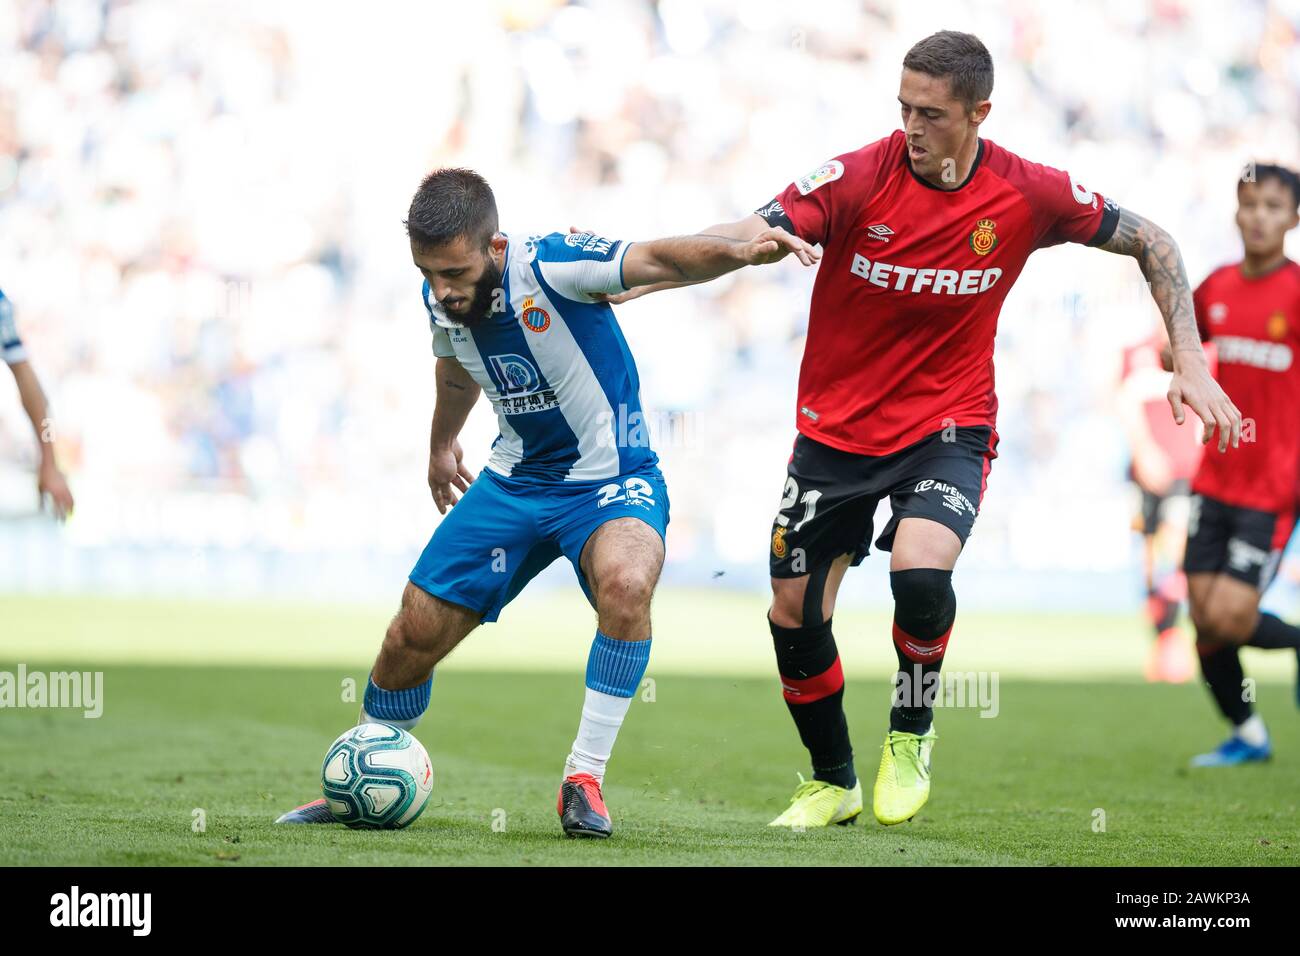 Cornella Del Llobregat, Spain. 09th Feb, 2020. BARCELONA, SPAIN - FEBRUARY 09: Matias Vargas of RCD Espanyol in action with Raillo of RCD Mallorca during the Liga match between RCD Espanyol and FC Barcelona at RCD Stadium on February 09, 2020 in Barcelona, Spain. Credit: Dax Images/Alamy Live News Stock Photo